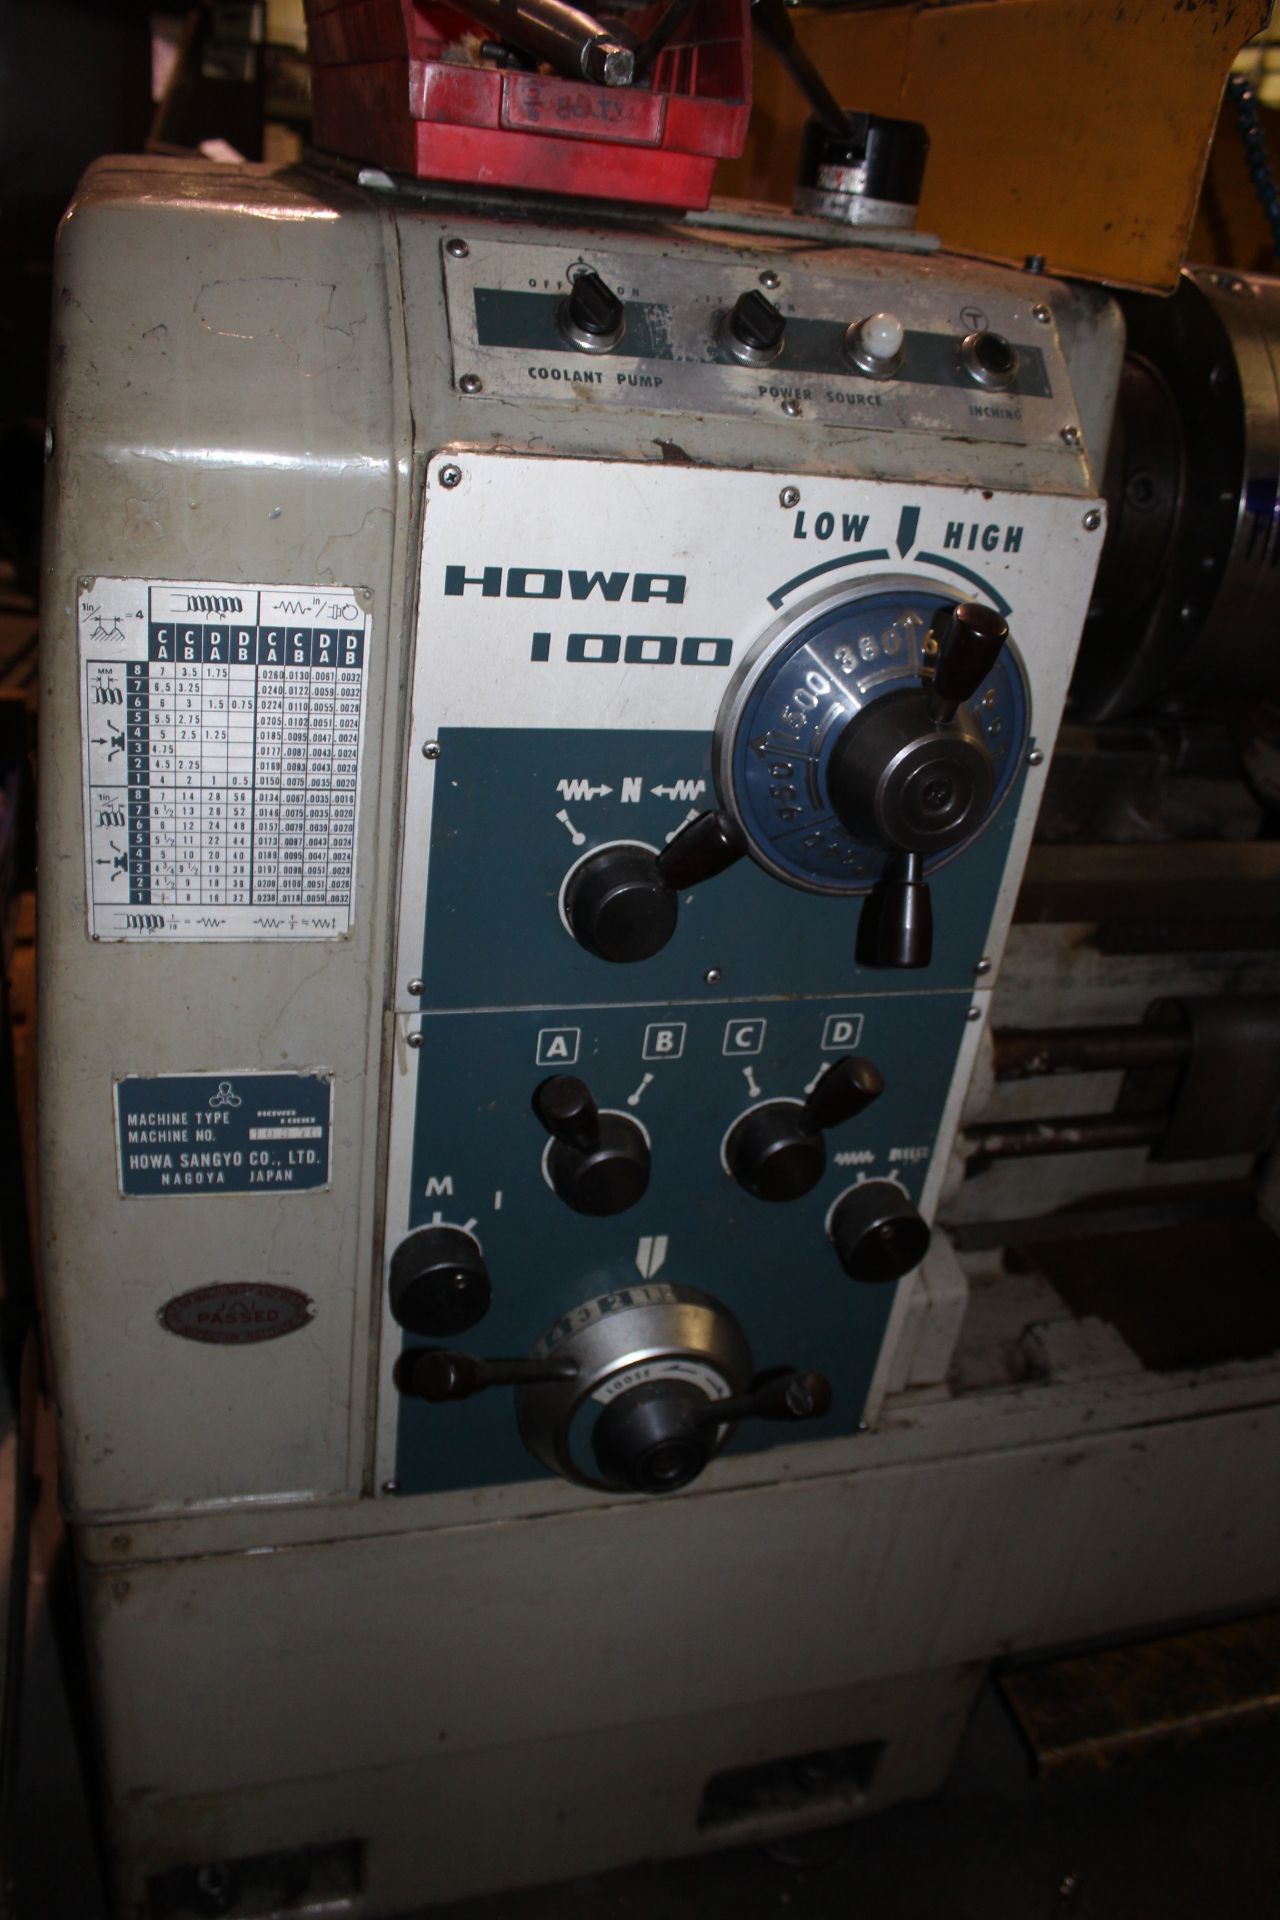 Howa model 1000 metal lathe 16" swing with one 3 jaw chuck - Image 3 of 5